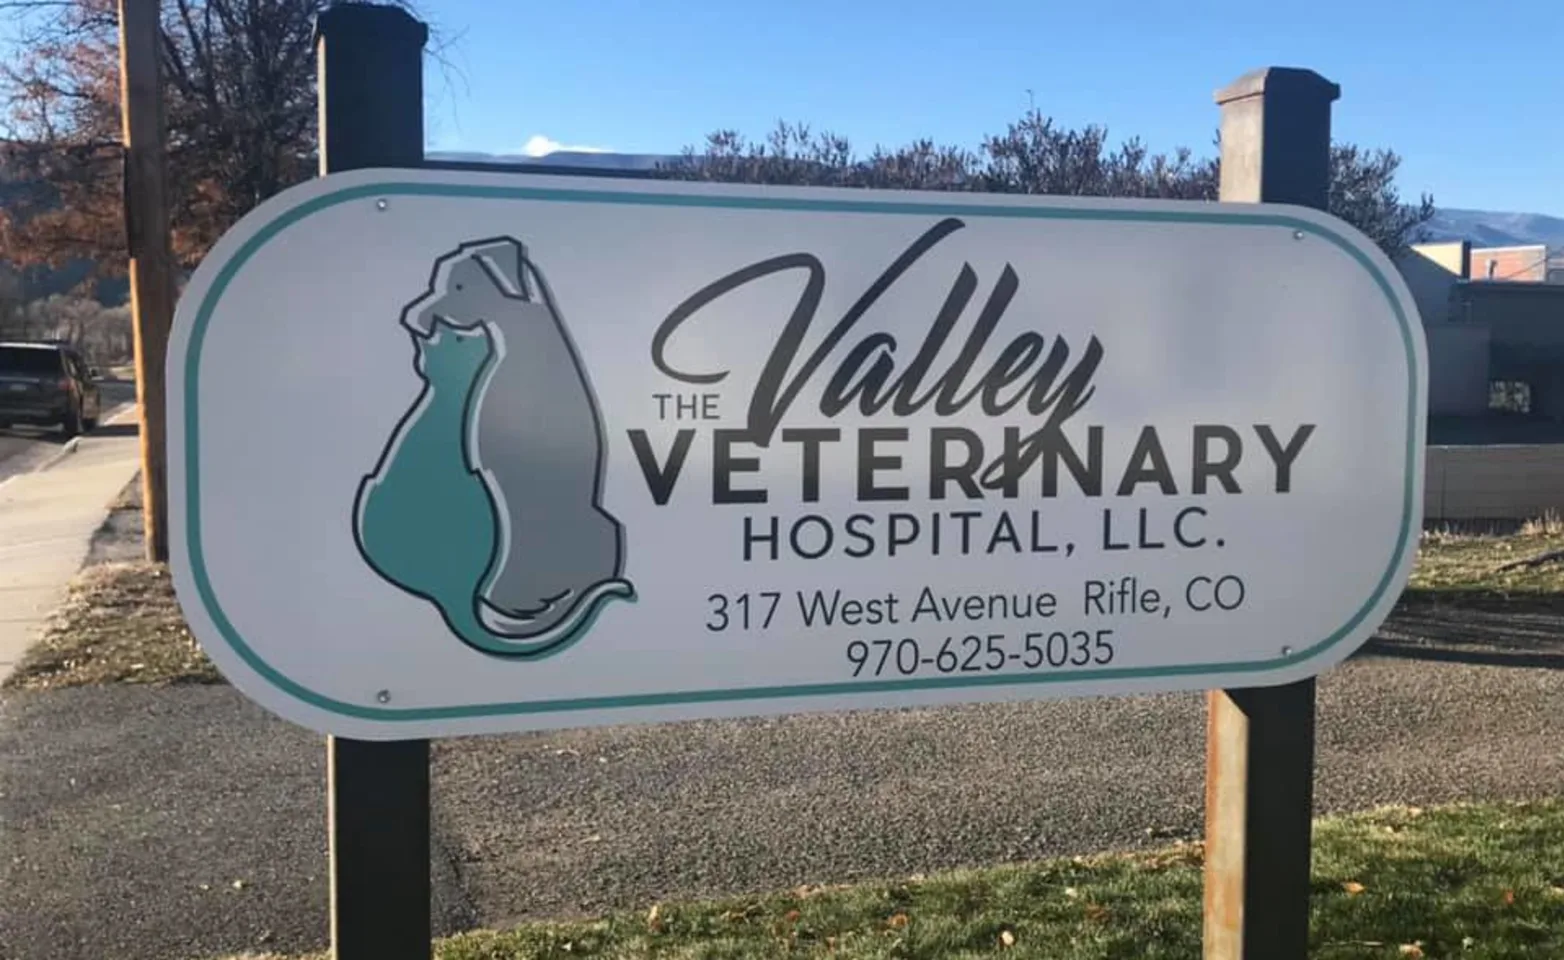 Signage on the front lawn of The Valley Vet Hospital